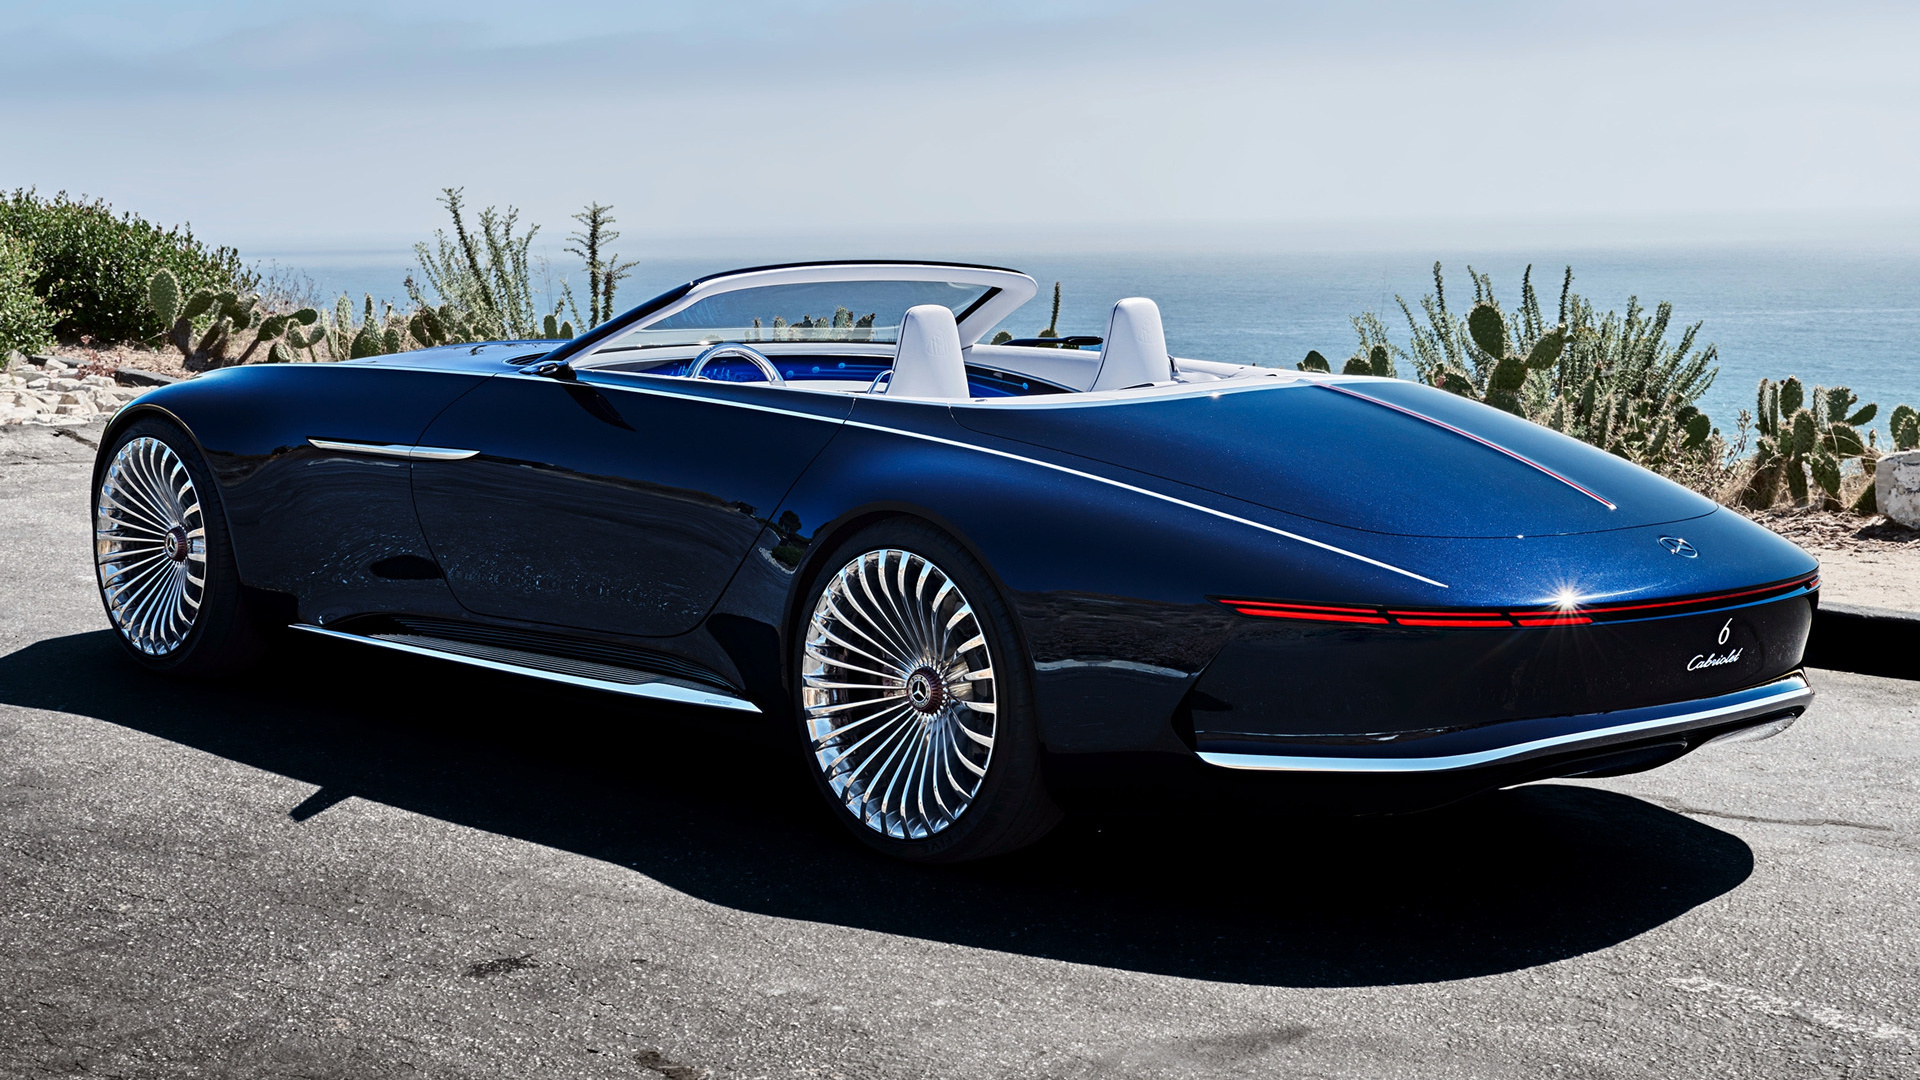 Mercedes-Benz Maybach, Auto expertise, Maybach vision 6, Concept wallpapers, 1920x1080 Full HD Desktop